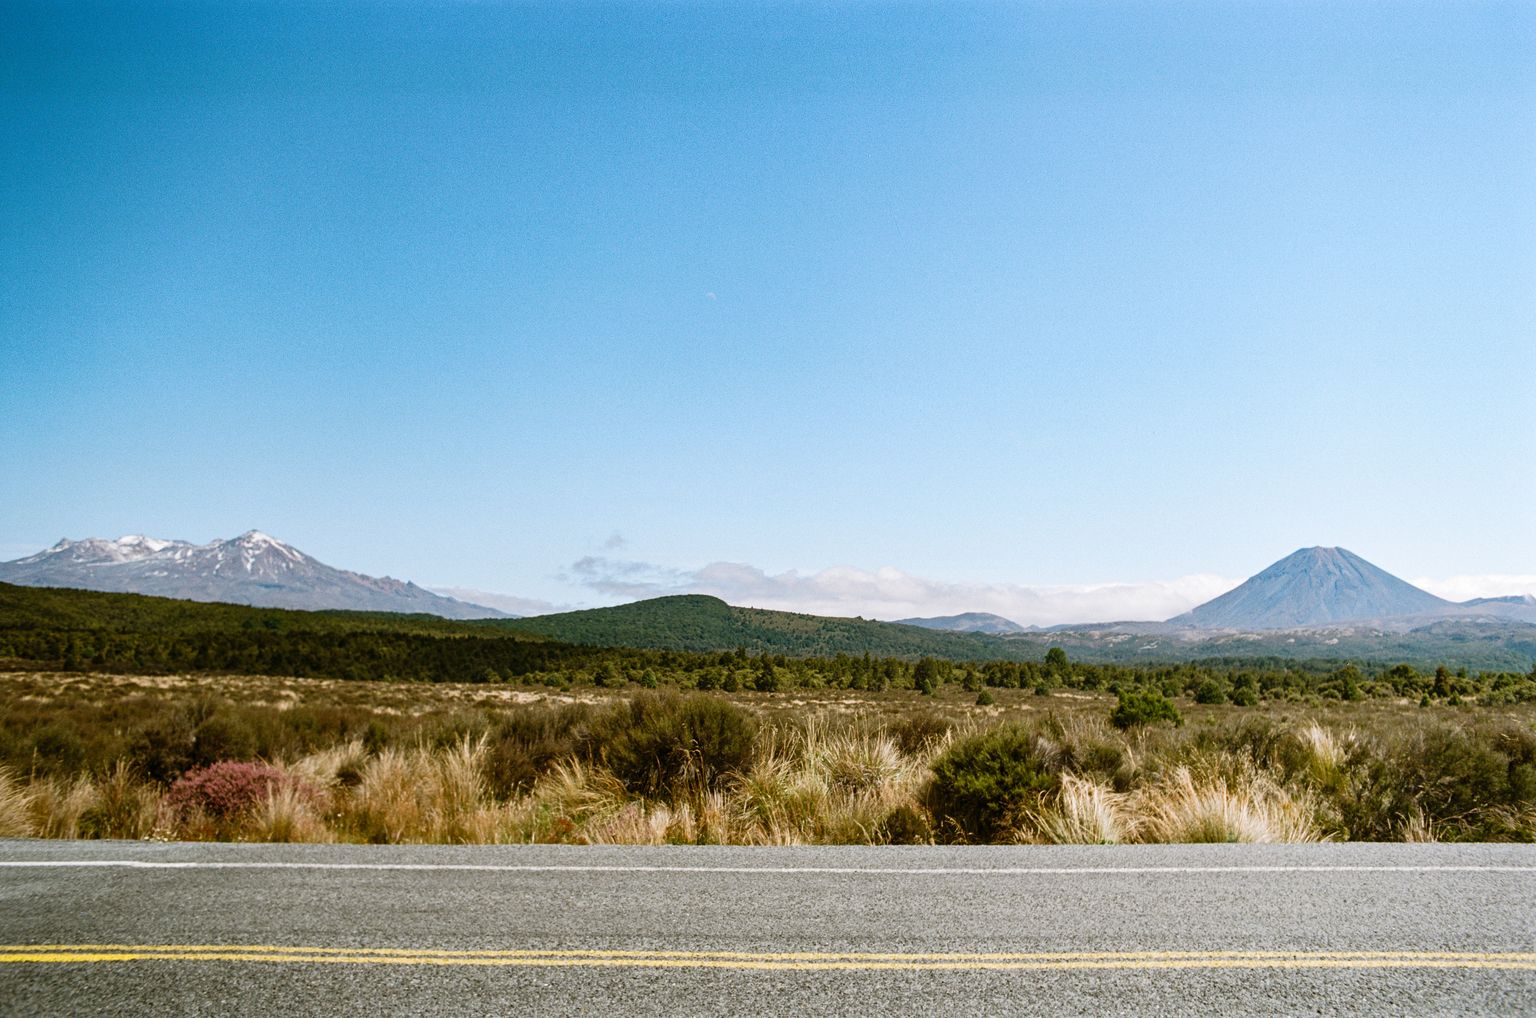 Looking across a road into a scrub desert with two mountains side-by-side in the distance, the left craggy and snow-covered, the right volcanic gray with a cinder cone.